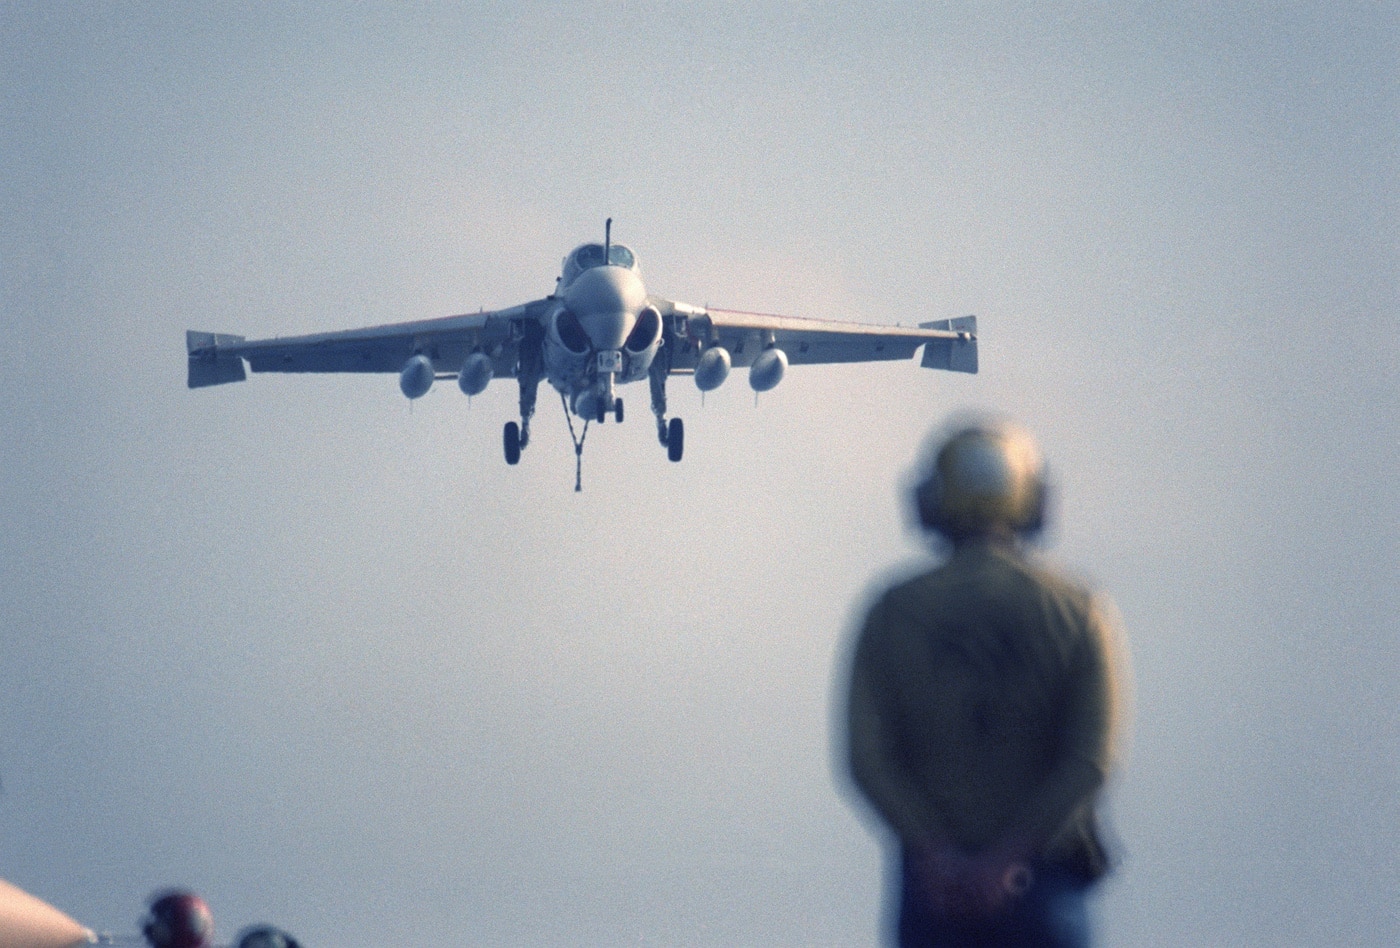 a-6 intruder landing on the uss american in 1984